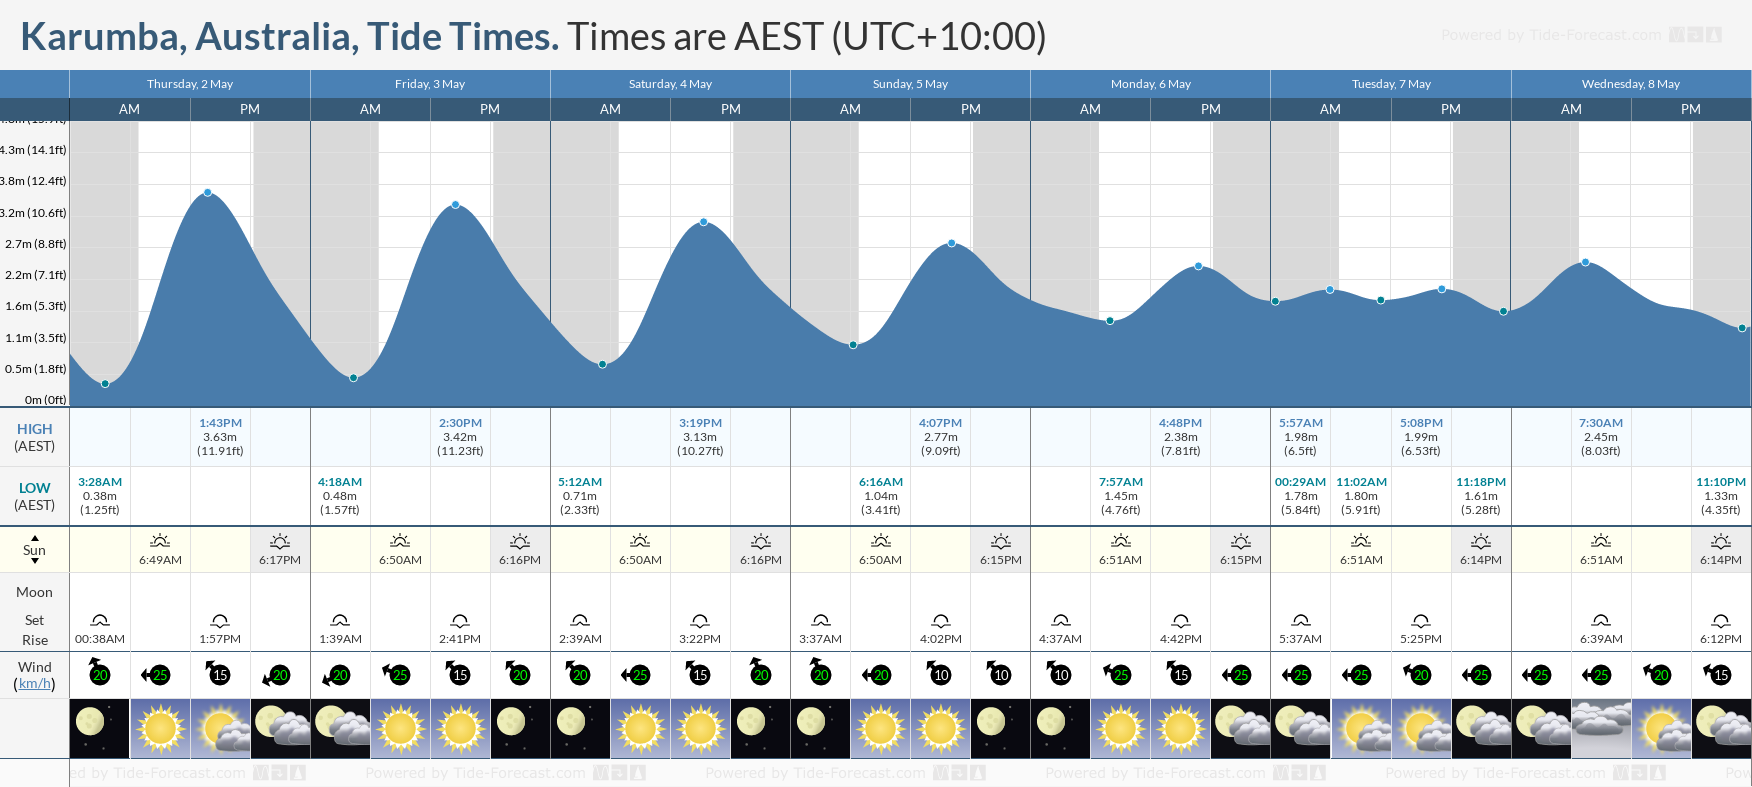 Karumba, Australia Tide Chart including high and low tide tide times for the next 7 days